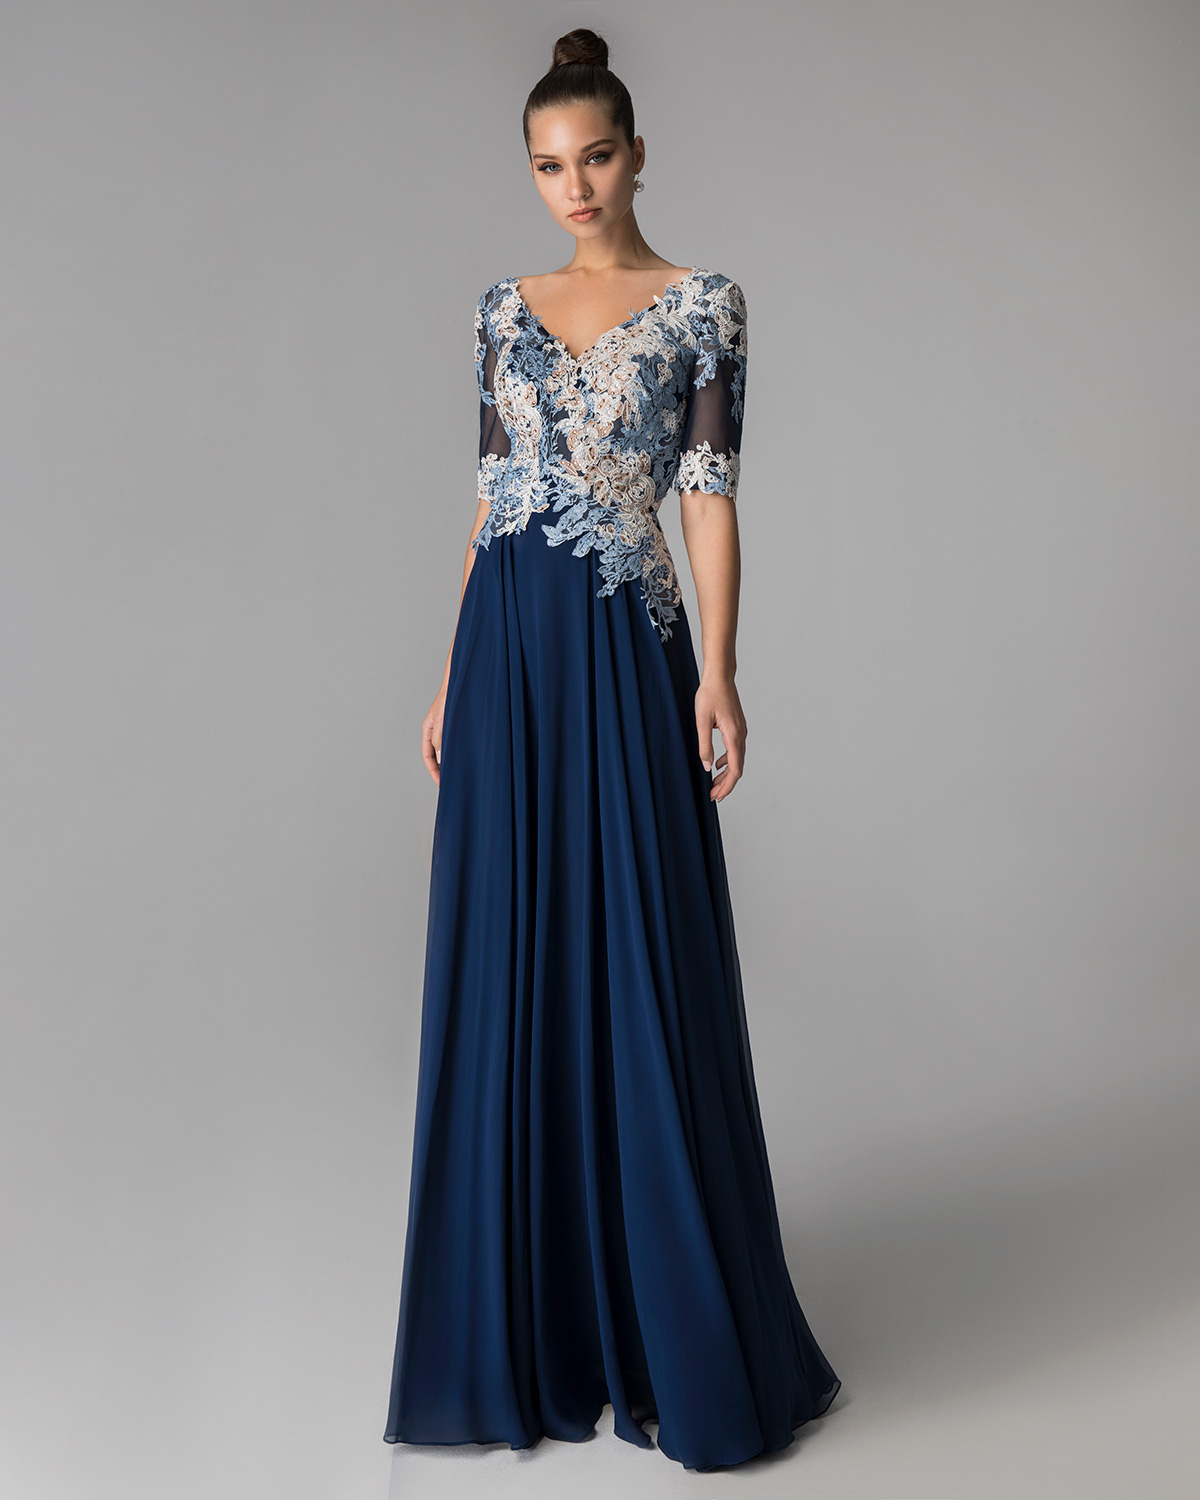 Classic Dresses / Long evening dress with applique lace on the top and short sleeves